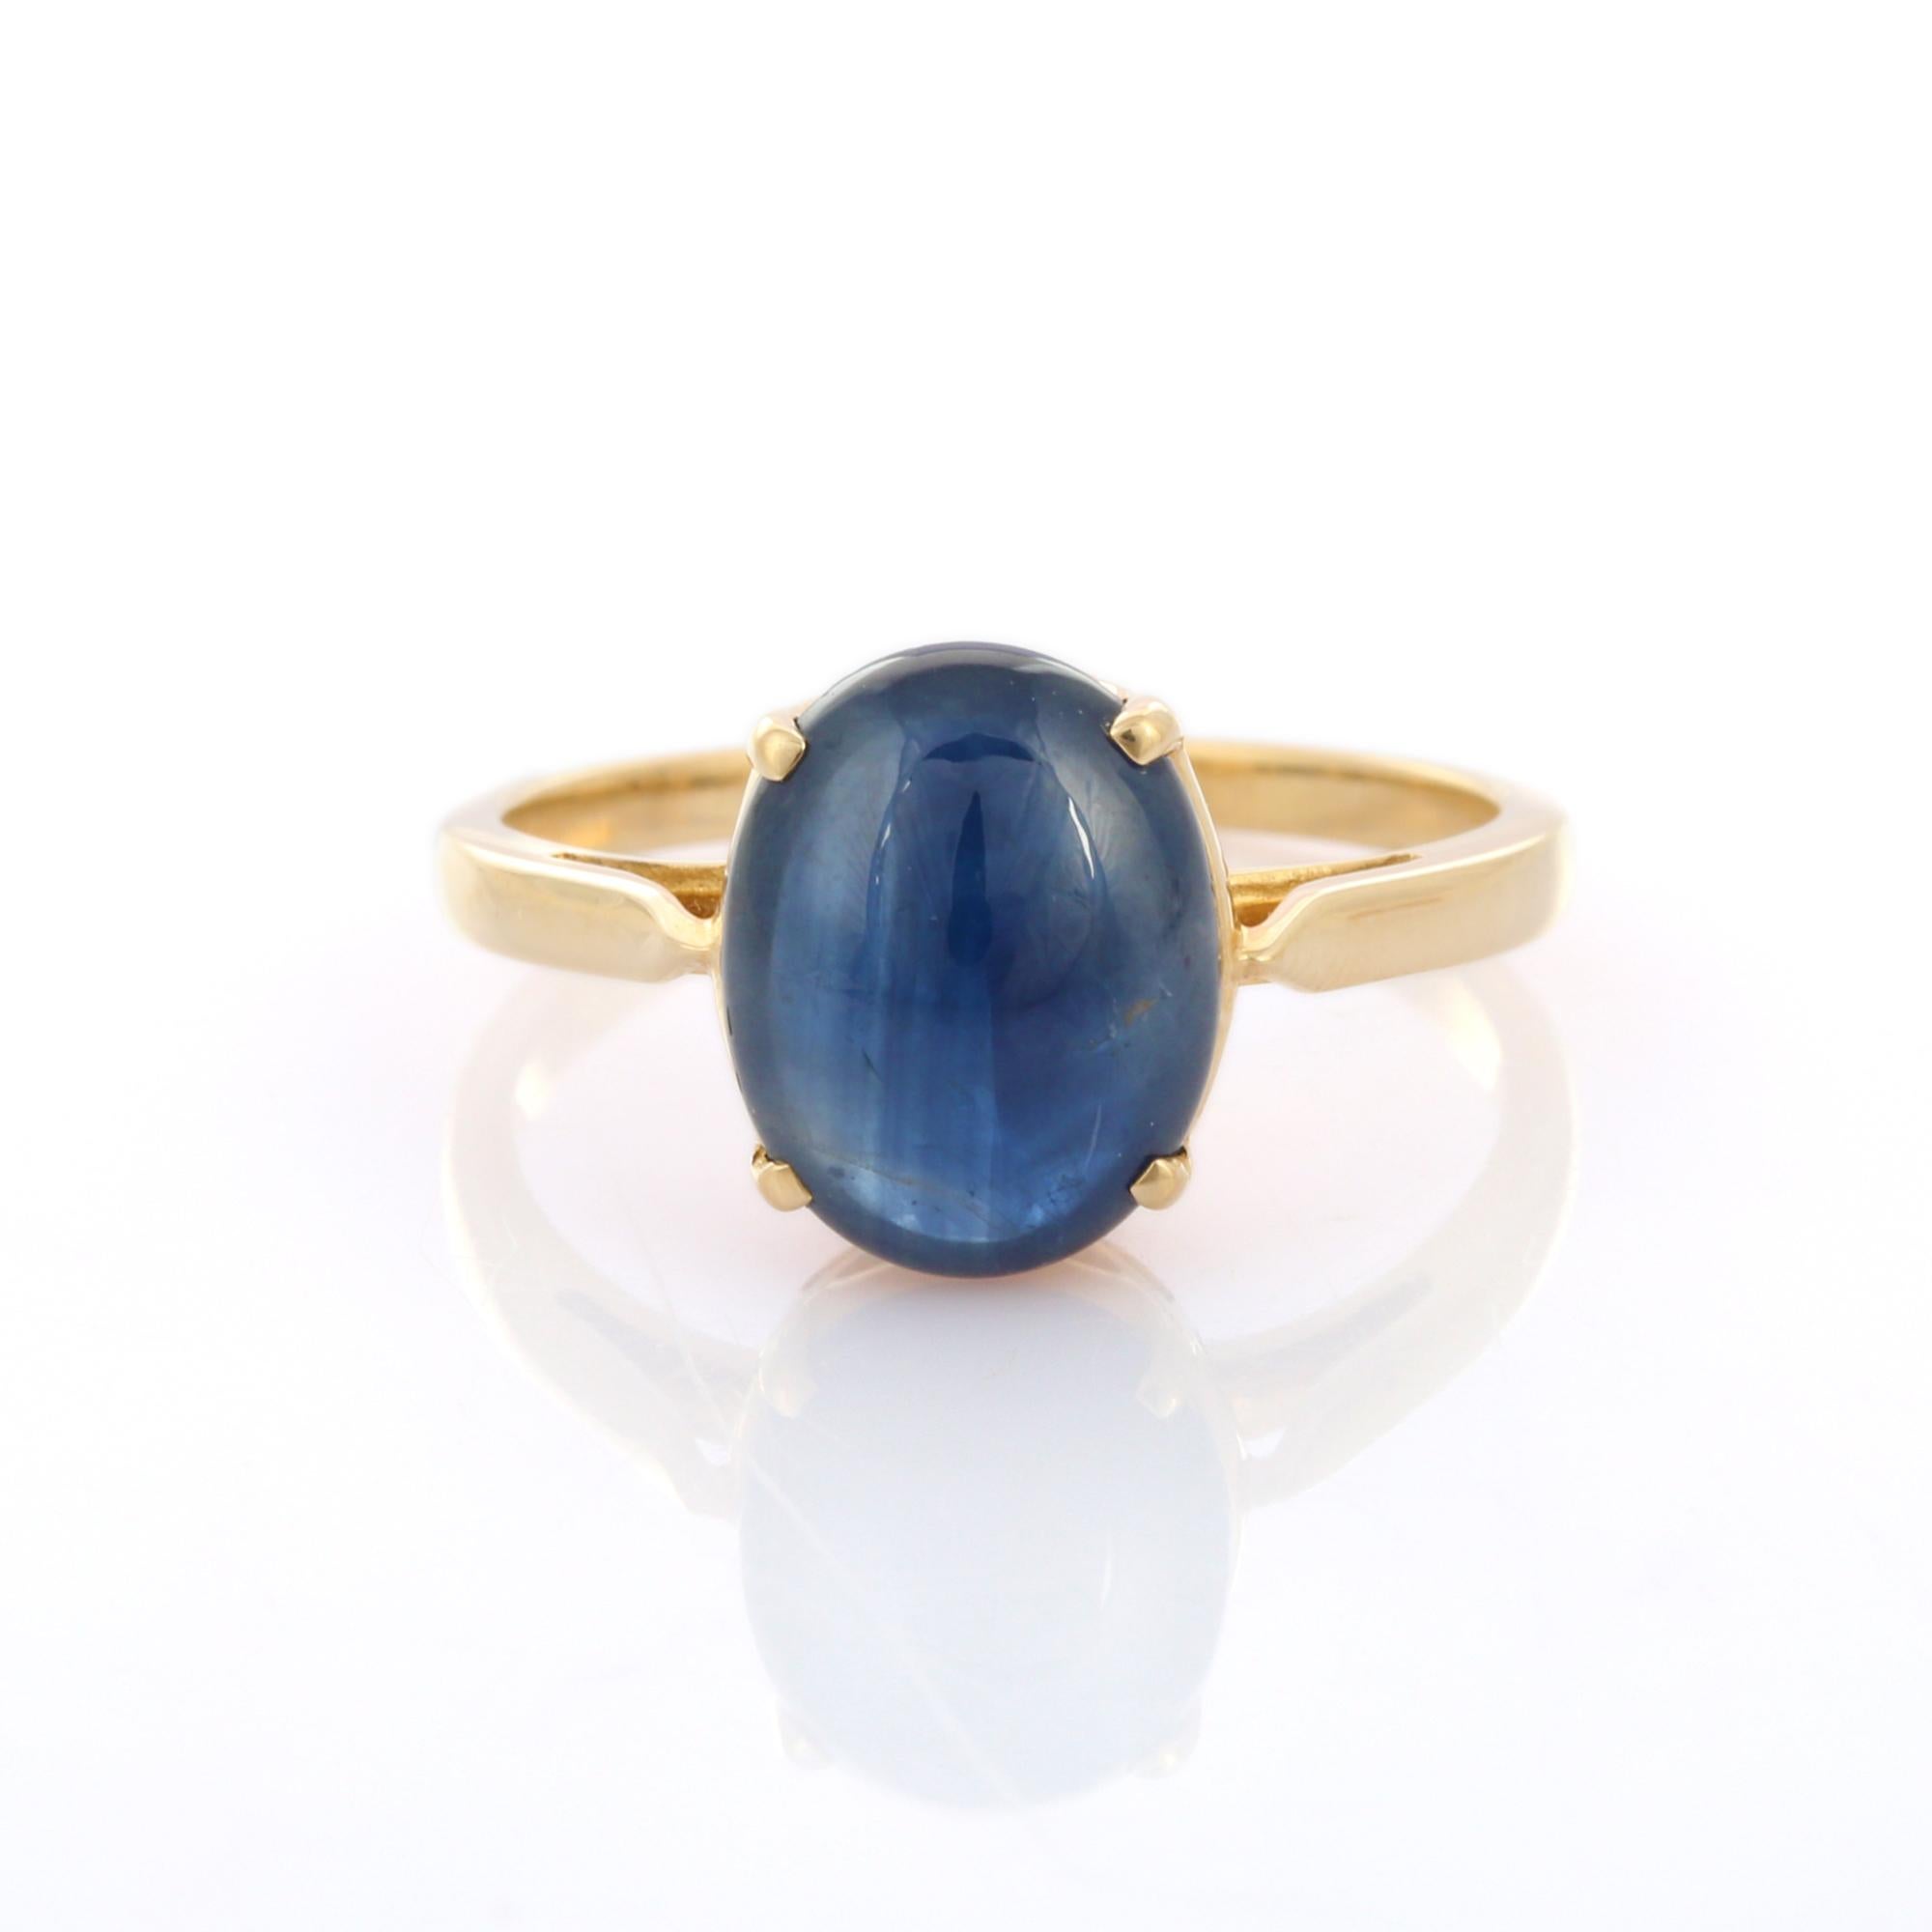 For Sale:  4.33 Carat Blue Sapphire Big Gemstone Ring in 14K Yellow Gold 9